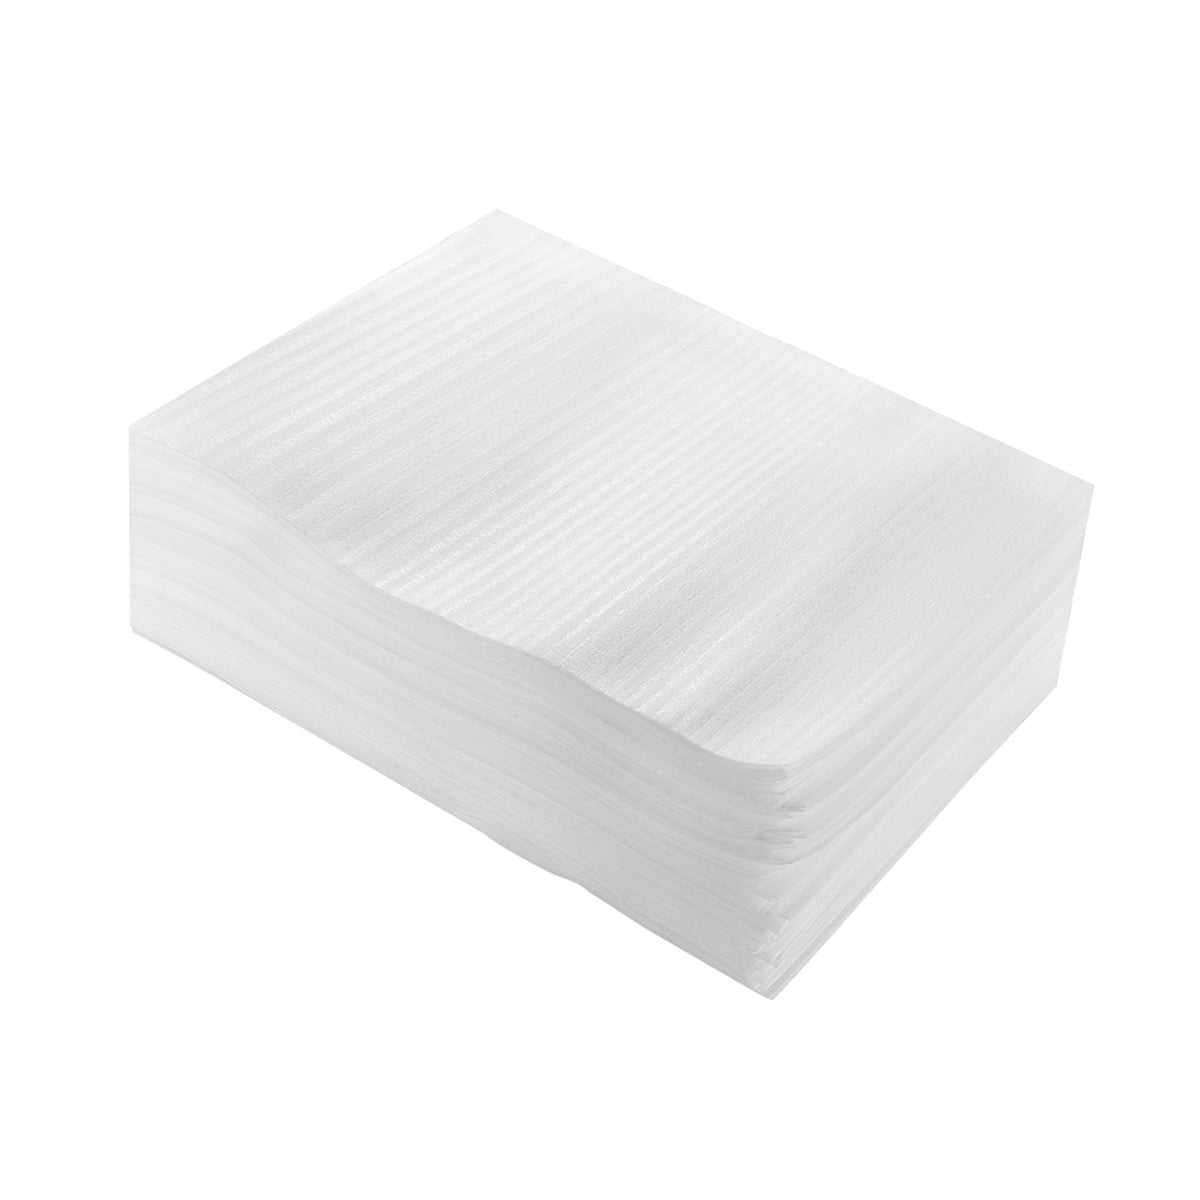 YEAZHEN 50pcs Foam Pouches, Packing Foam Wrap Sheets for Shipping, Fragile Items, Cushioning Foam Padding for Packaging Dishes/China/Cups/Plates/Mugs